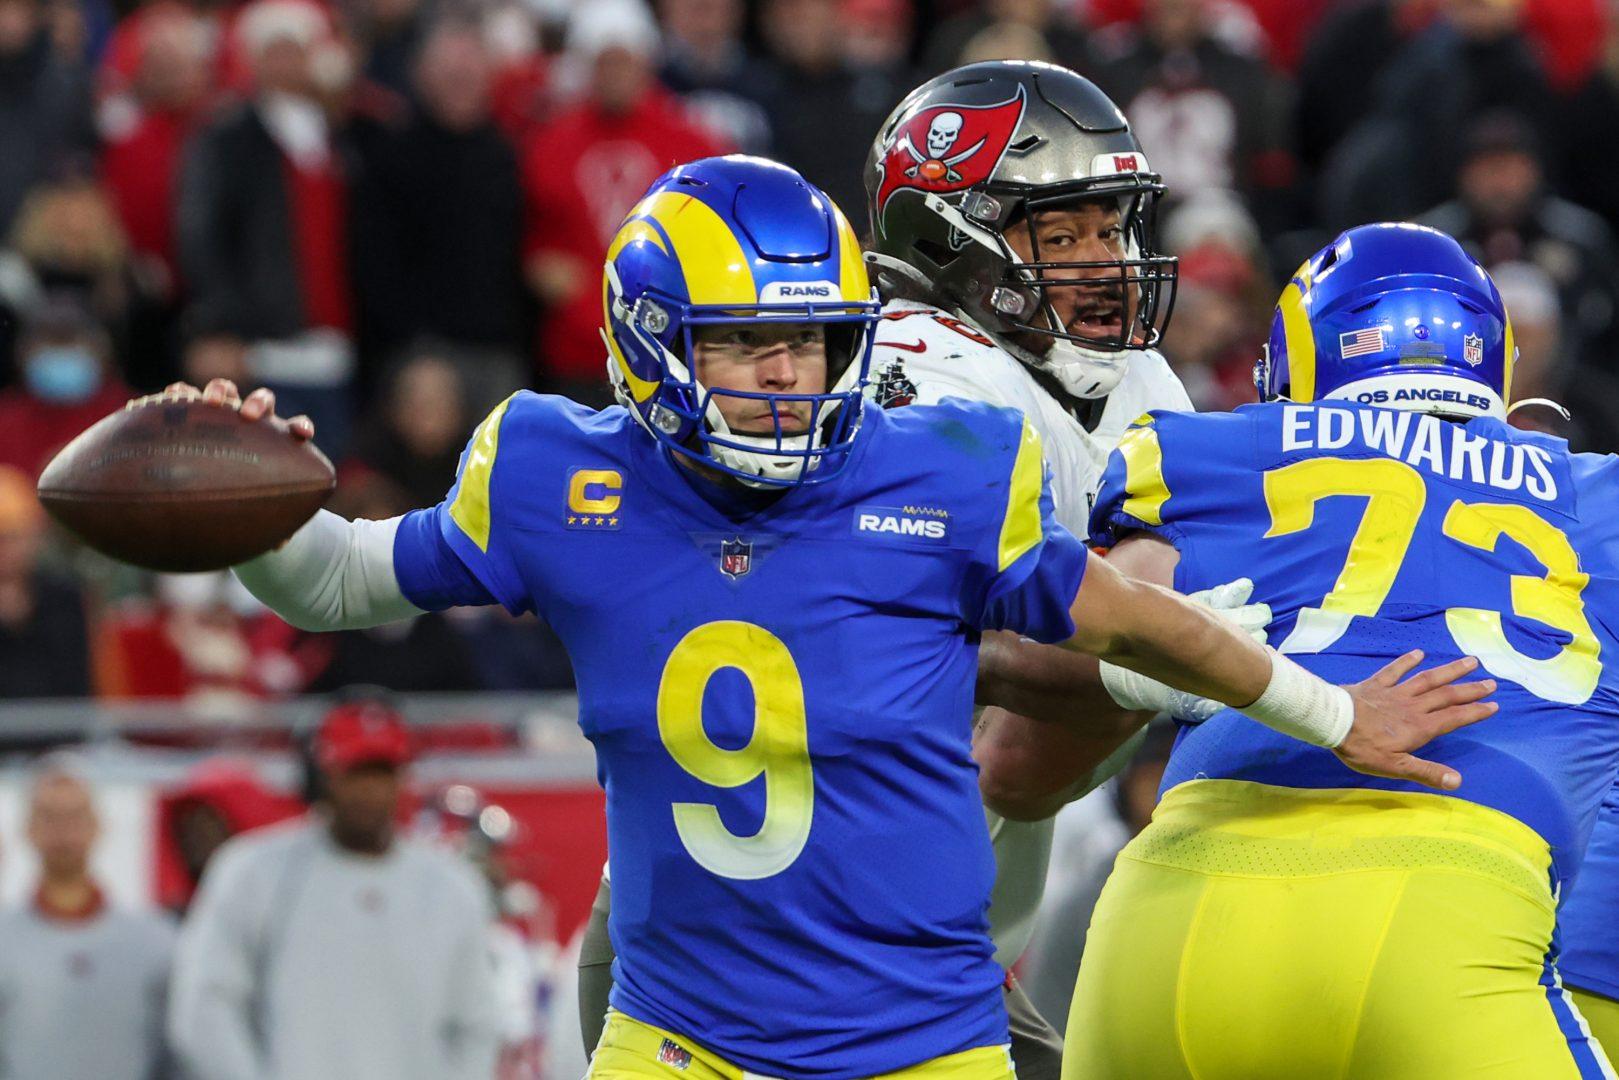 Los Angeles Rams quarterback Matthew Stafford (9) moves to avoid pressure from Tampa Bay Buccaneers nose tackle Vita Vea (50) during a second-half drive in an NFC Divisional Playoff game at Raymond James Stadium on Jan. 23, 2022, in Tampa, Florida. (Robert Gauthier/Los Angeles Times/TNS)